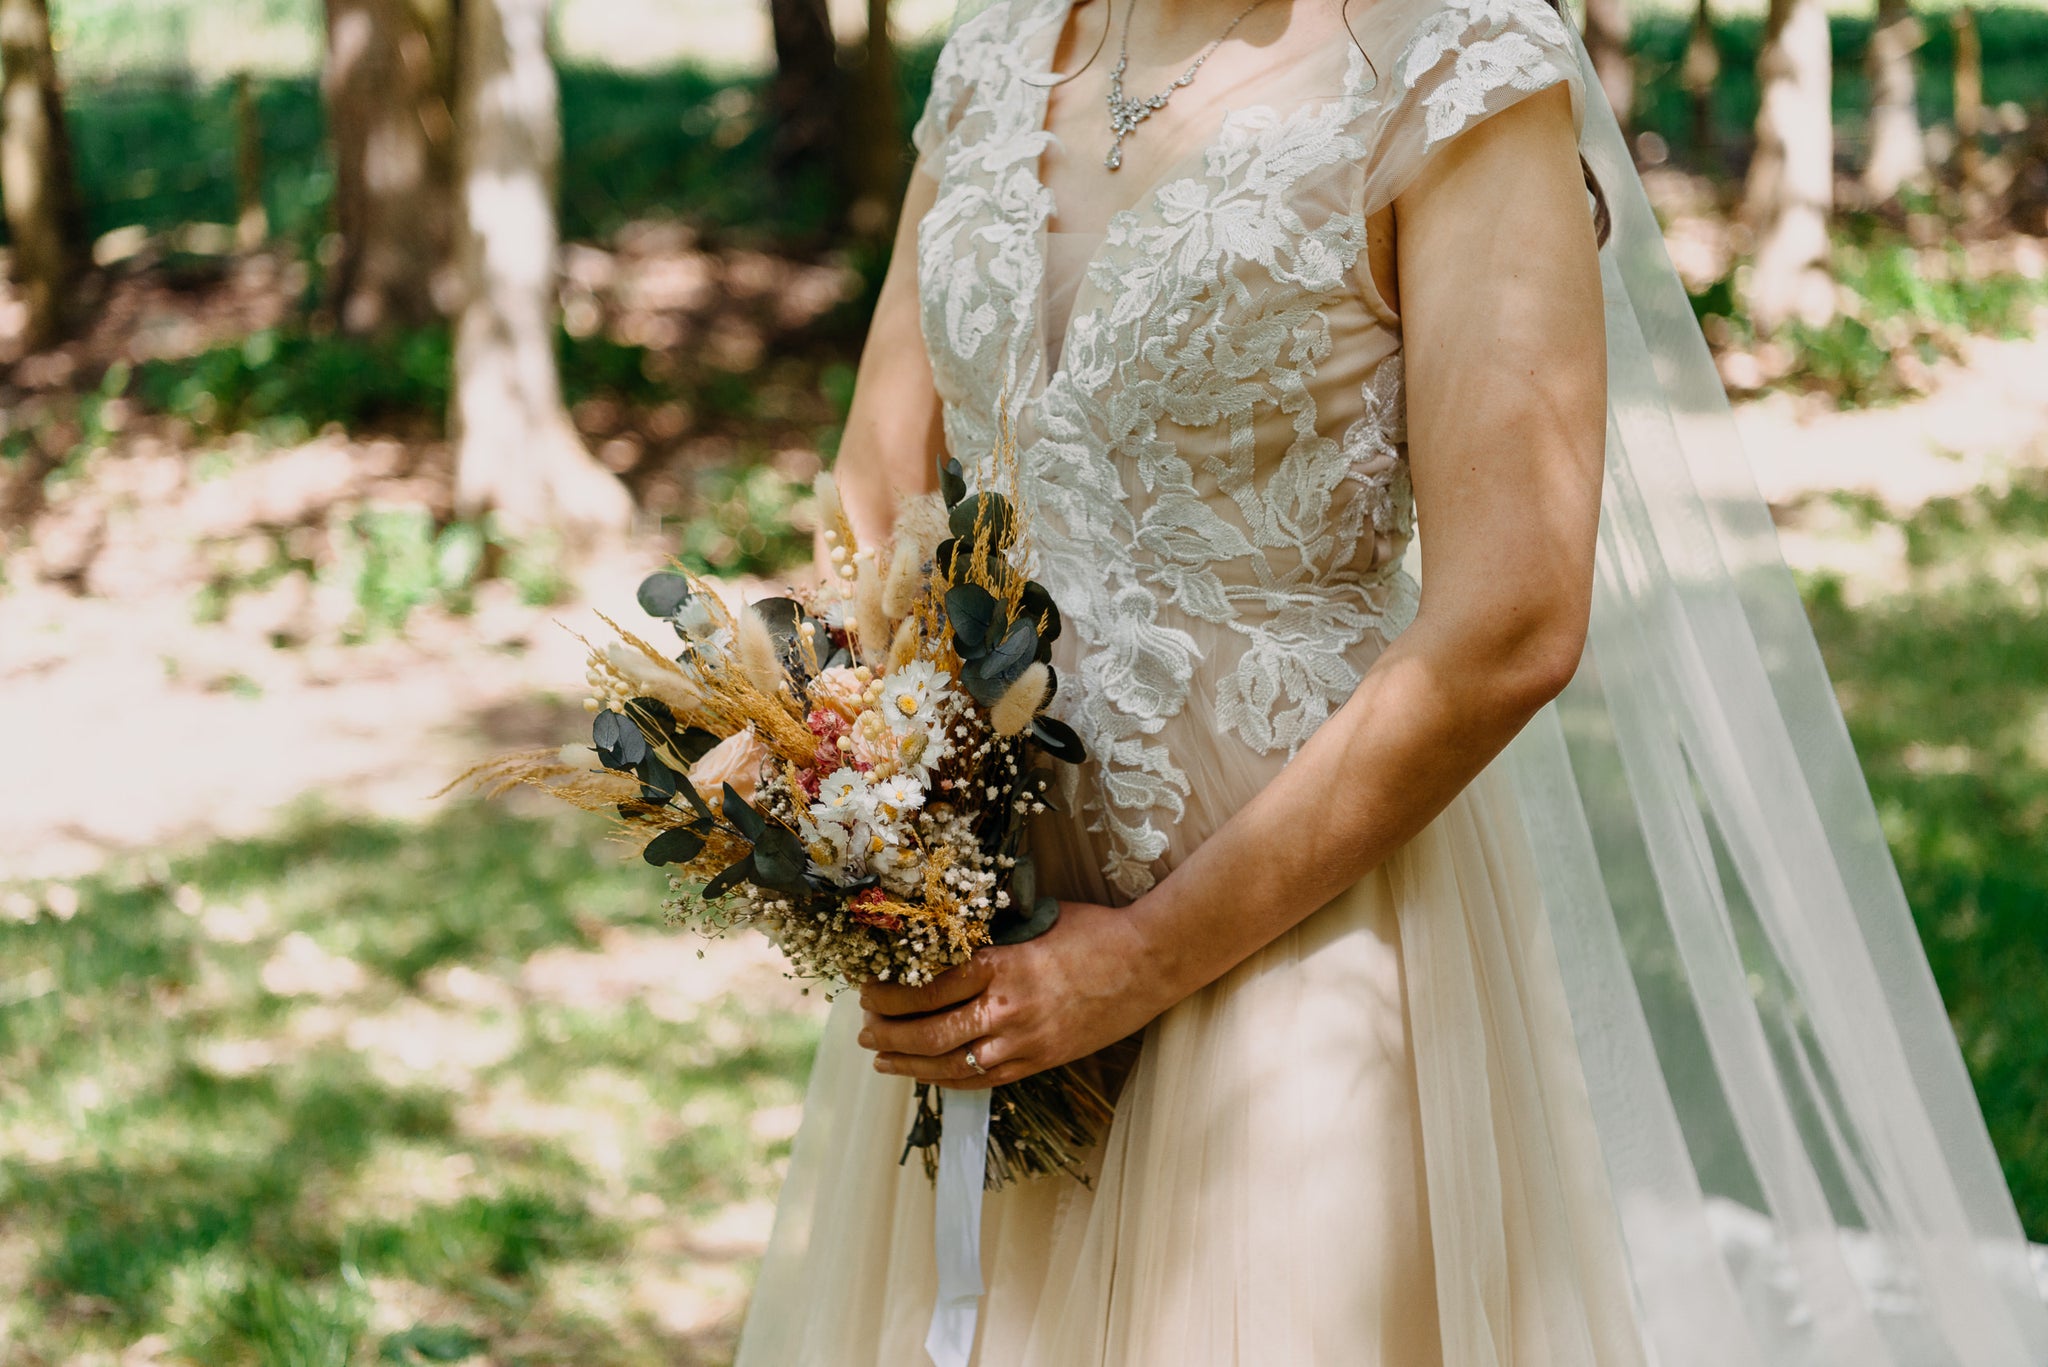 A bride in a lace dress holds a textured Hidden Botanics bouquet featuring dark foliage and white blooms in a serene woodland setting.